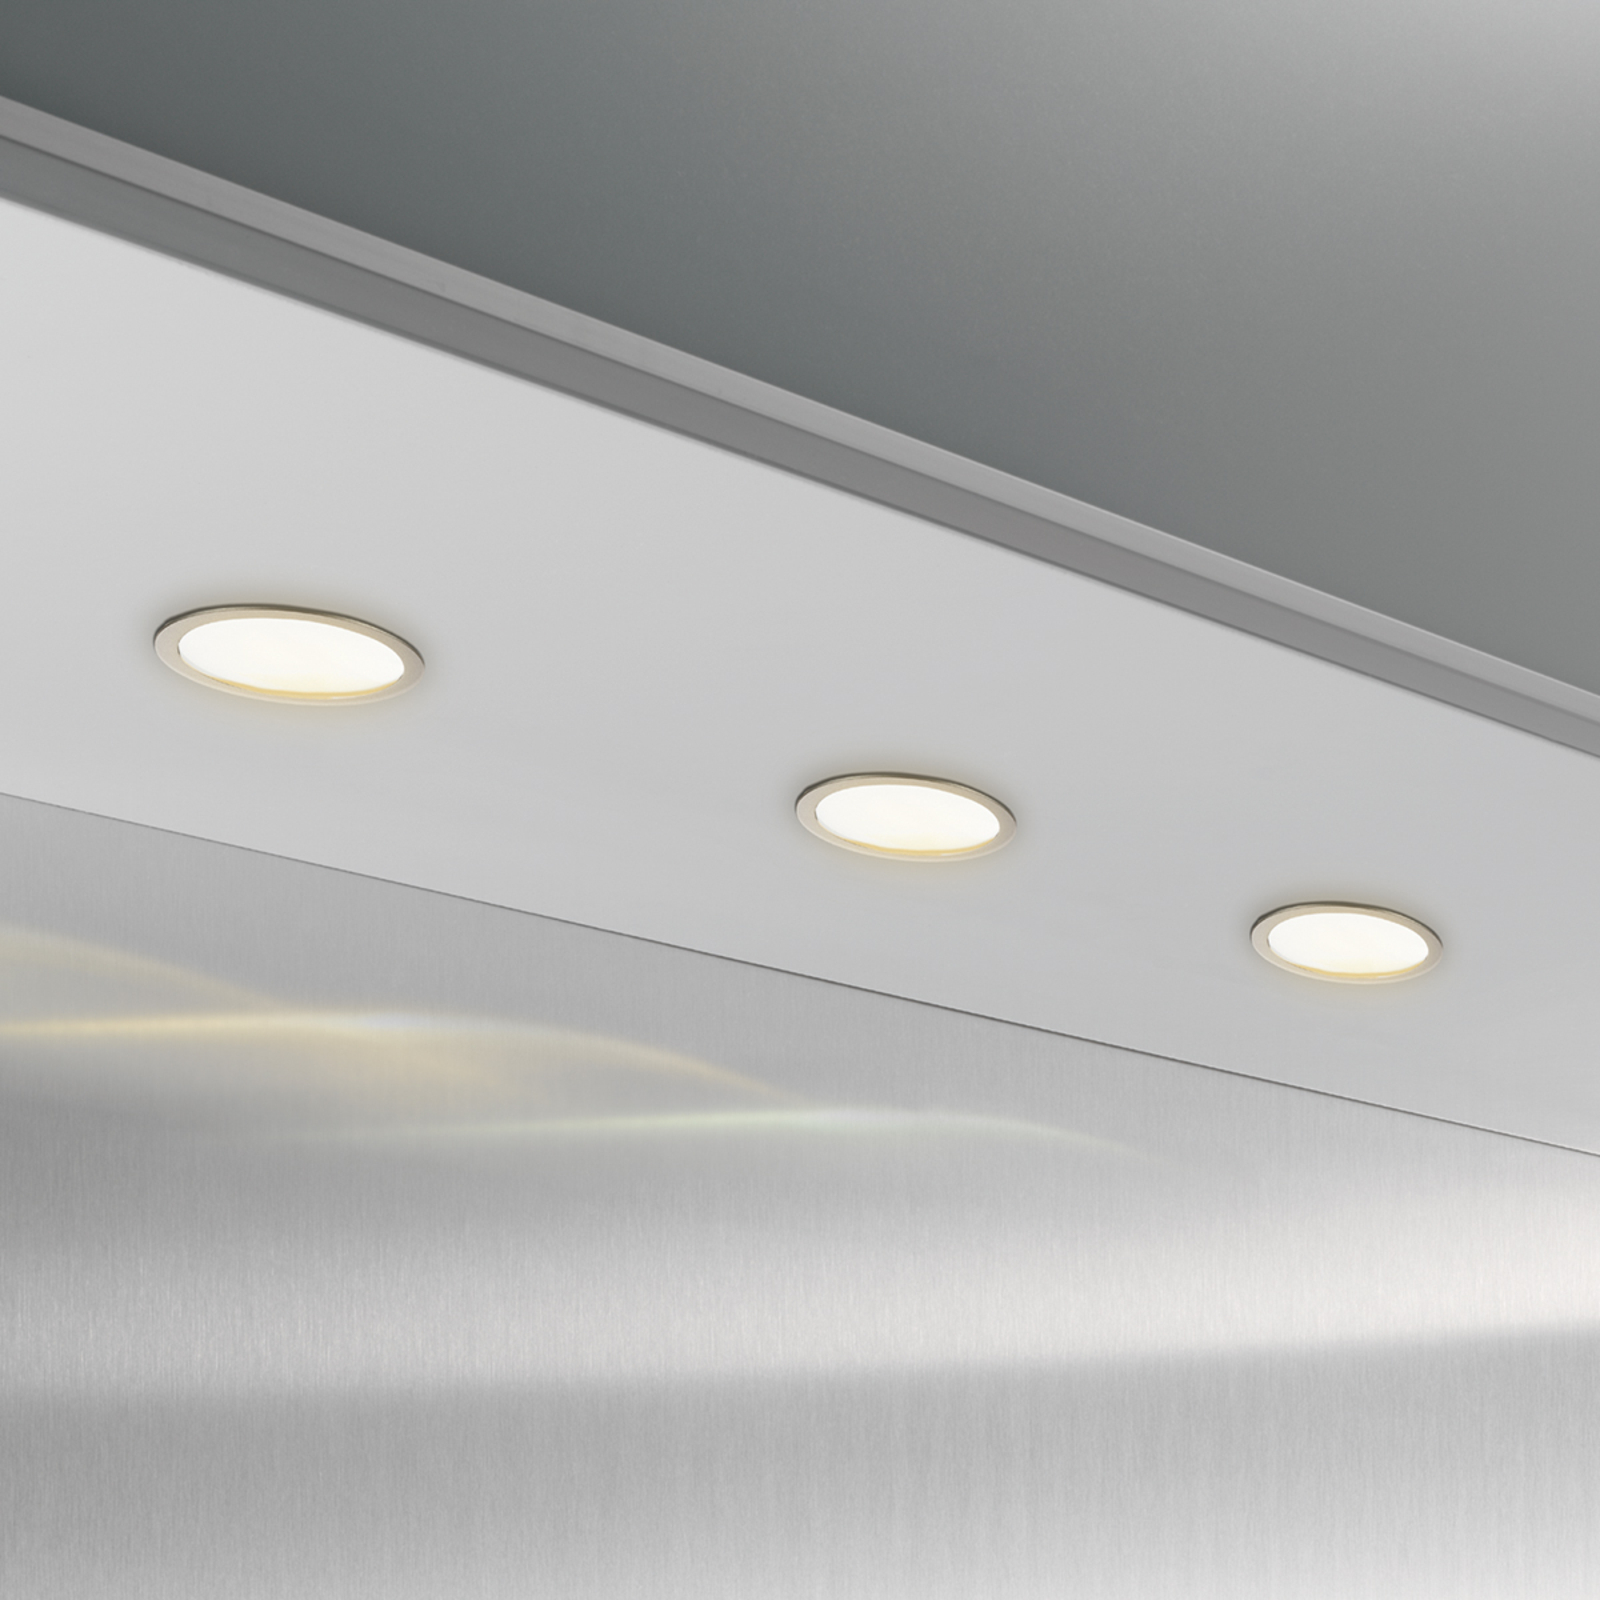 set of 3 Cubic 68 warm white LED recessed light